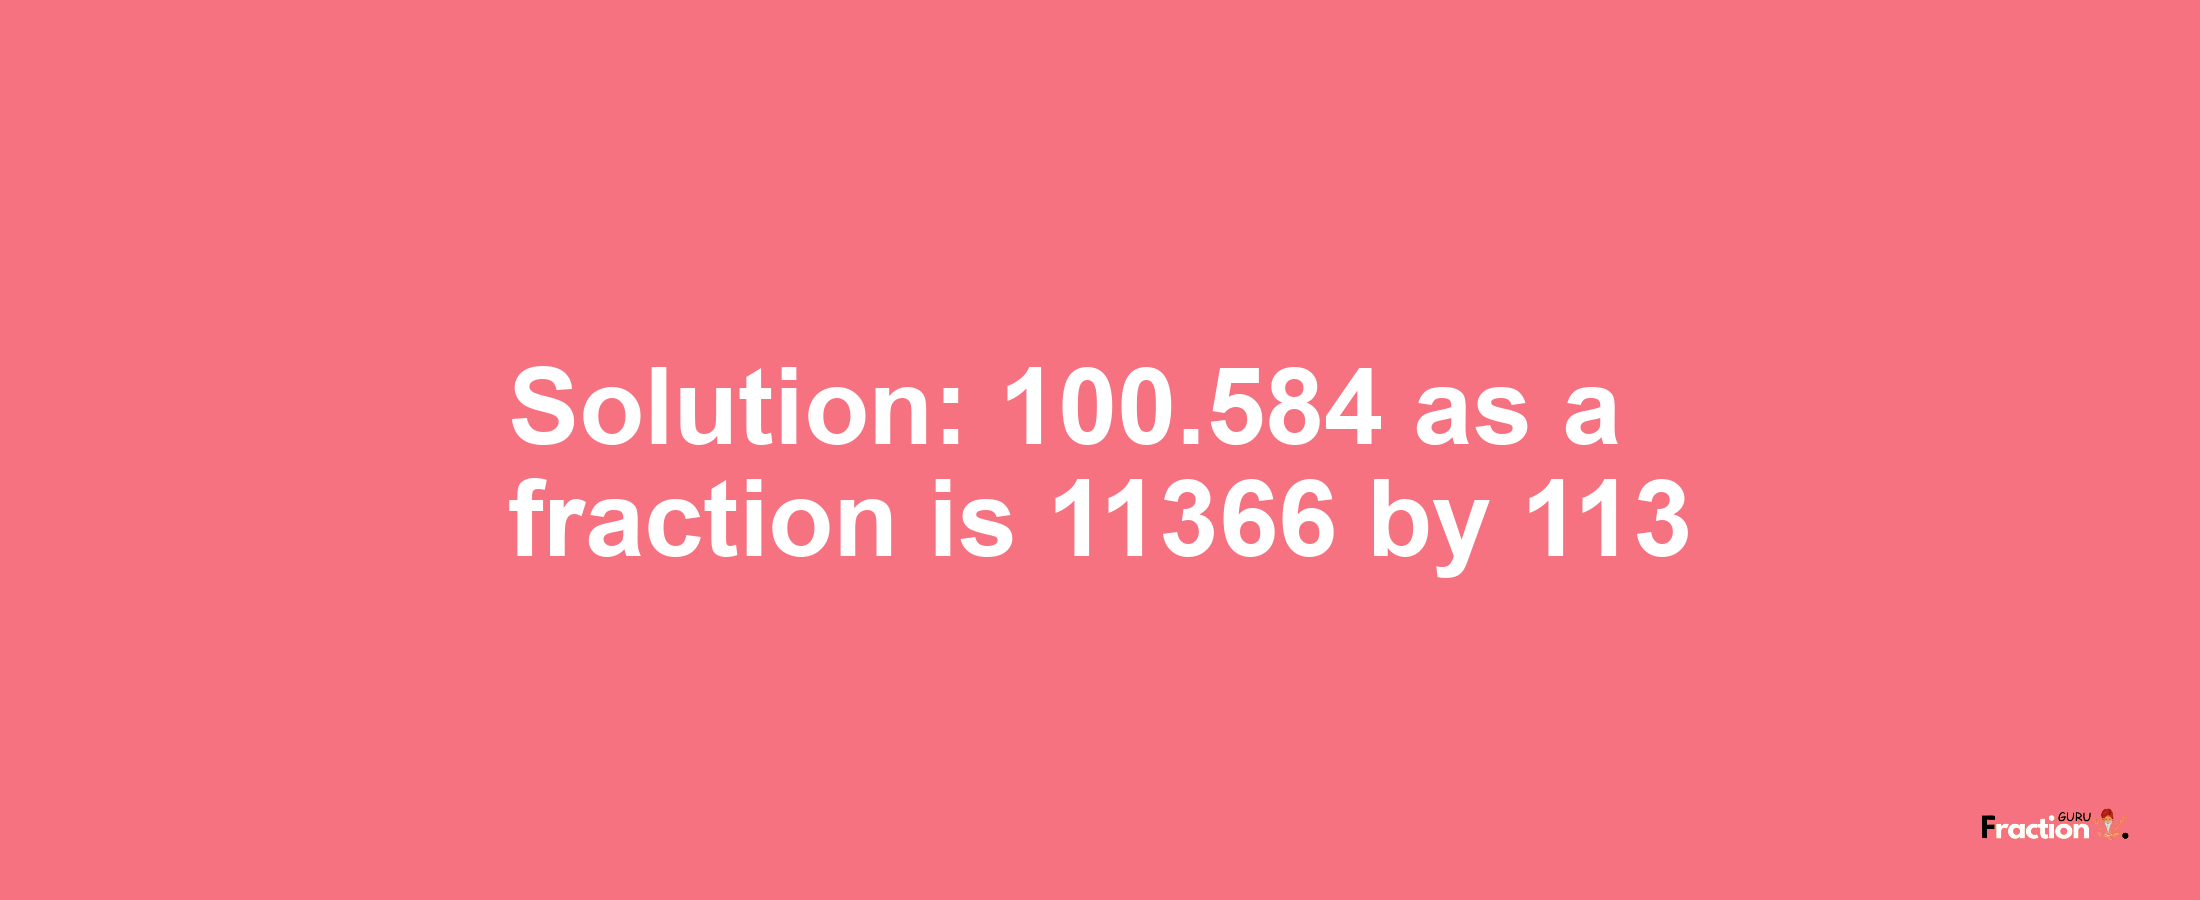 Solution:100.584 as a fraction is 11366/113